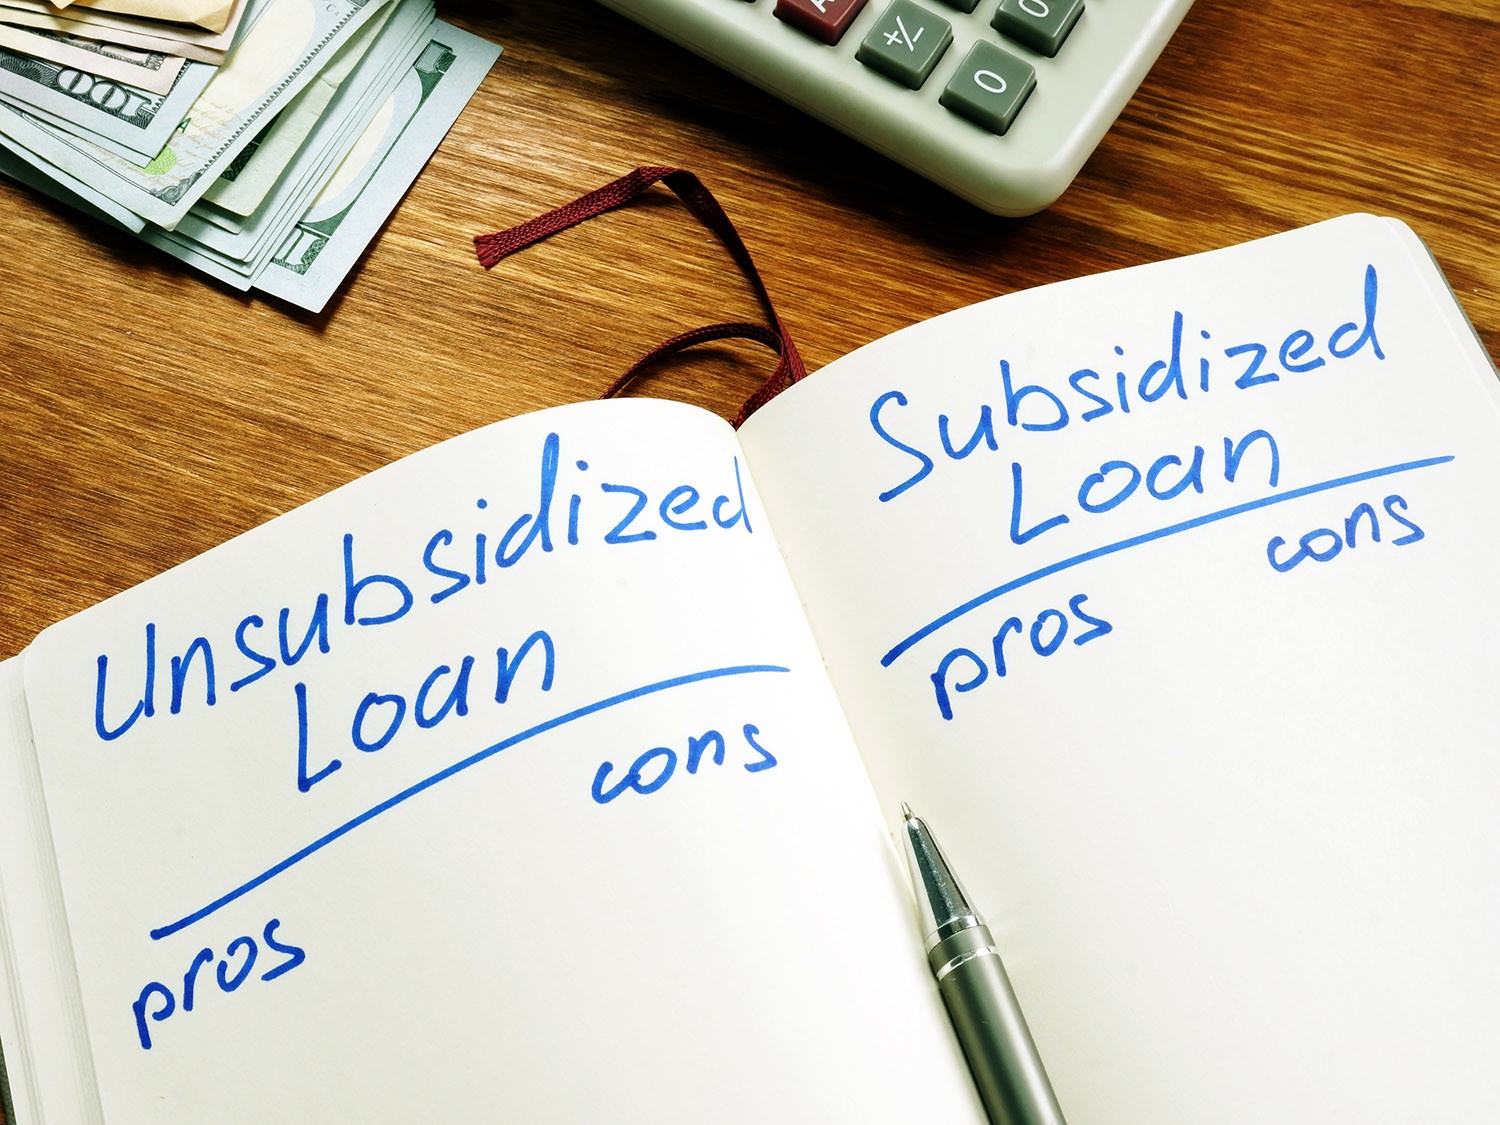 Notebook listing pros and cons of unsubsidized and subsidized loans.